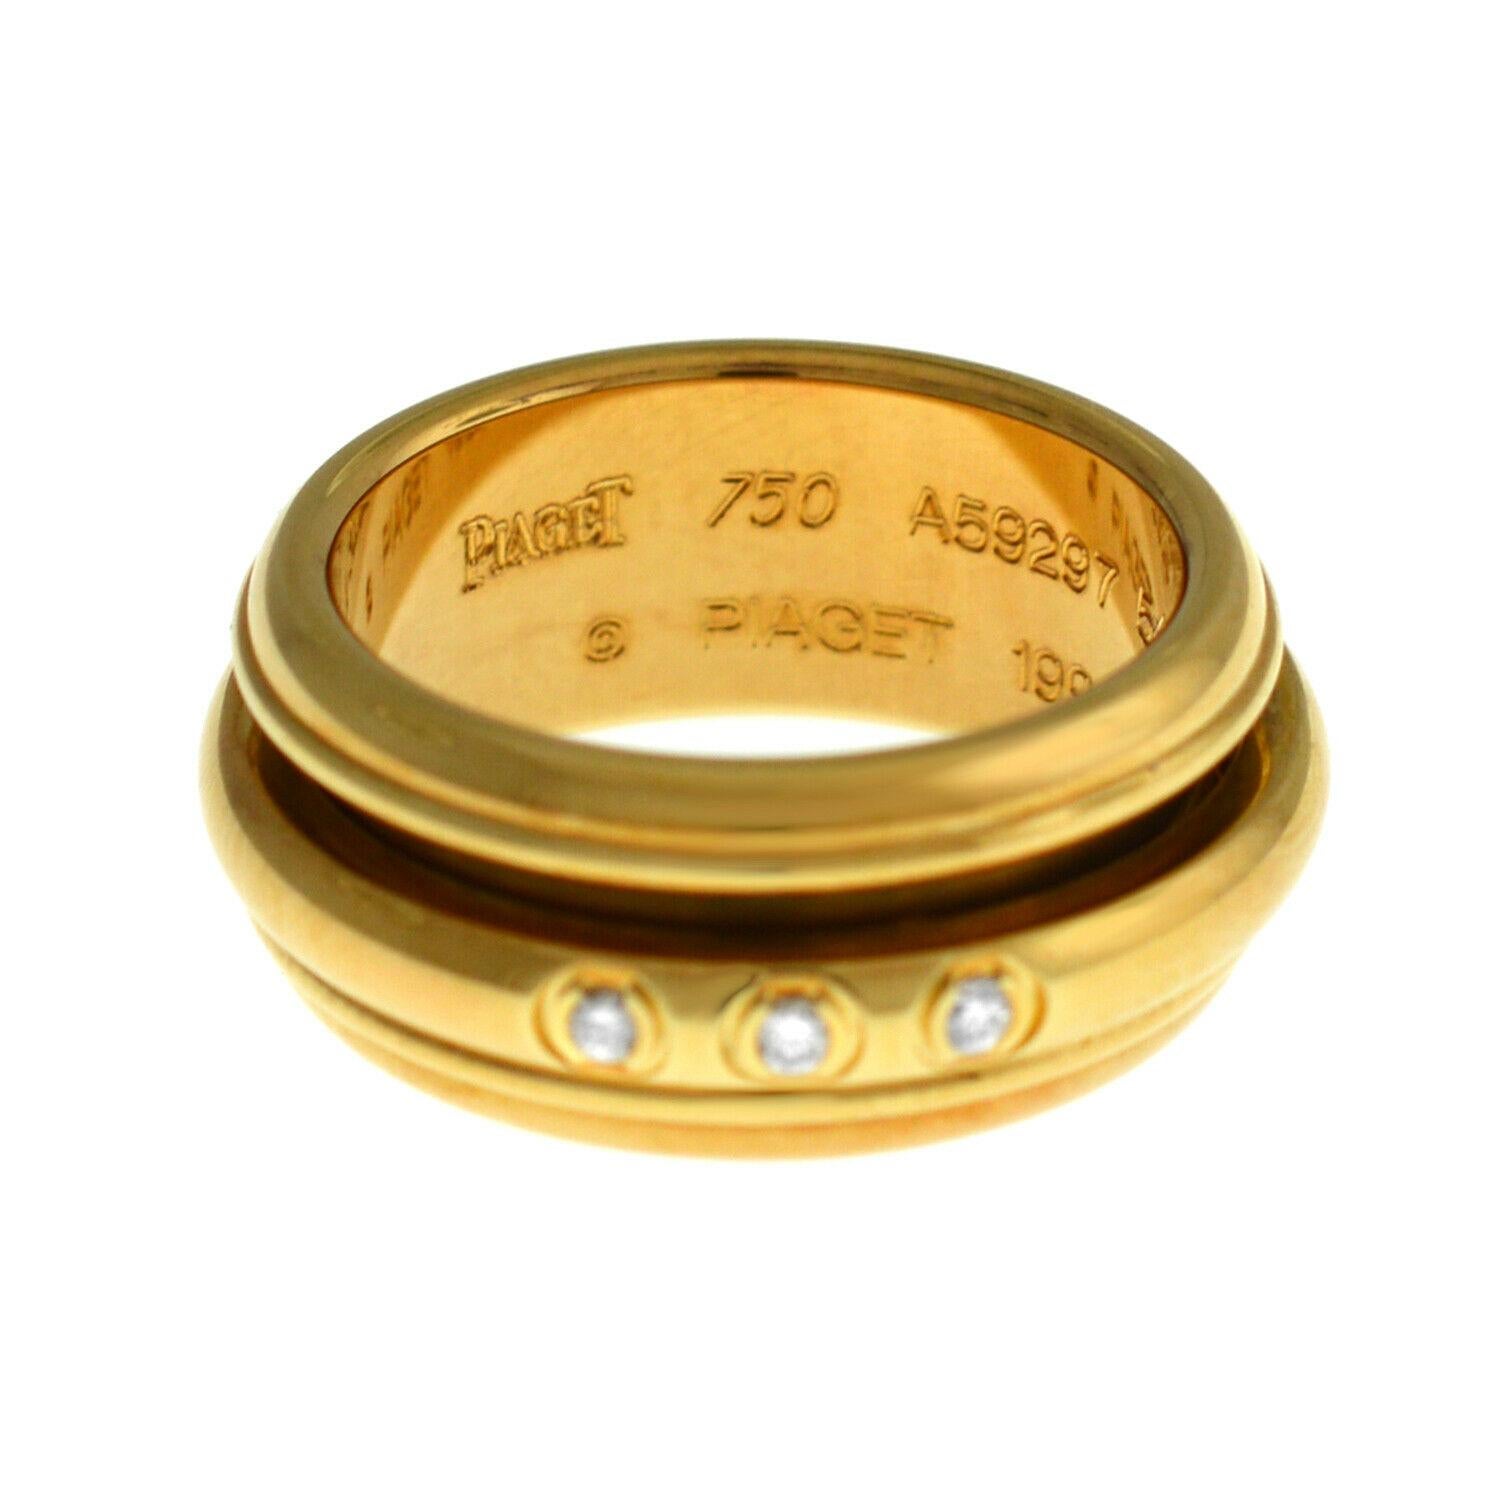 Brand	Piaget
Model	Possession
Gender	Ladies
Condition	New Old Stock
Metal 	18K Yellow Gold
Metal Weight	14 gr.
Size 7
New old stock ring without any scratches. This stunning Rotating Double Piaget ring is made from 18K Yellow Gold weighting at 14